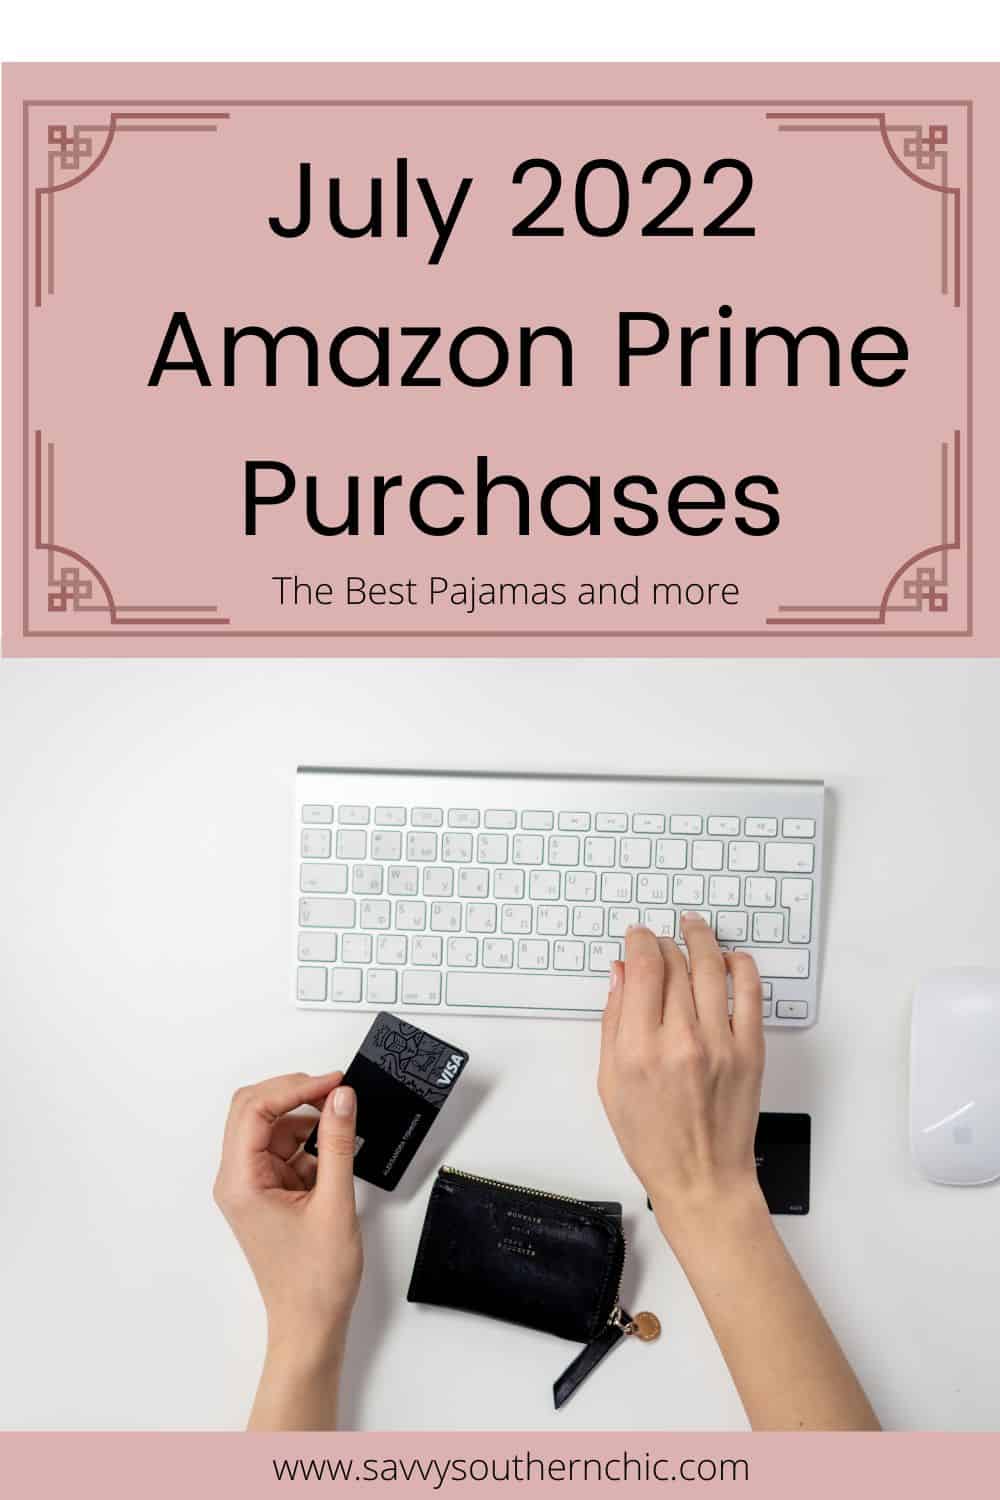 Pajamas From Amazon and More: Prime purchases July 2022